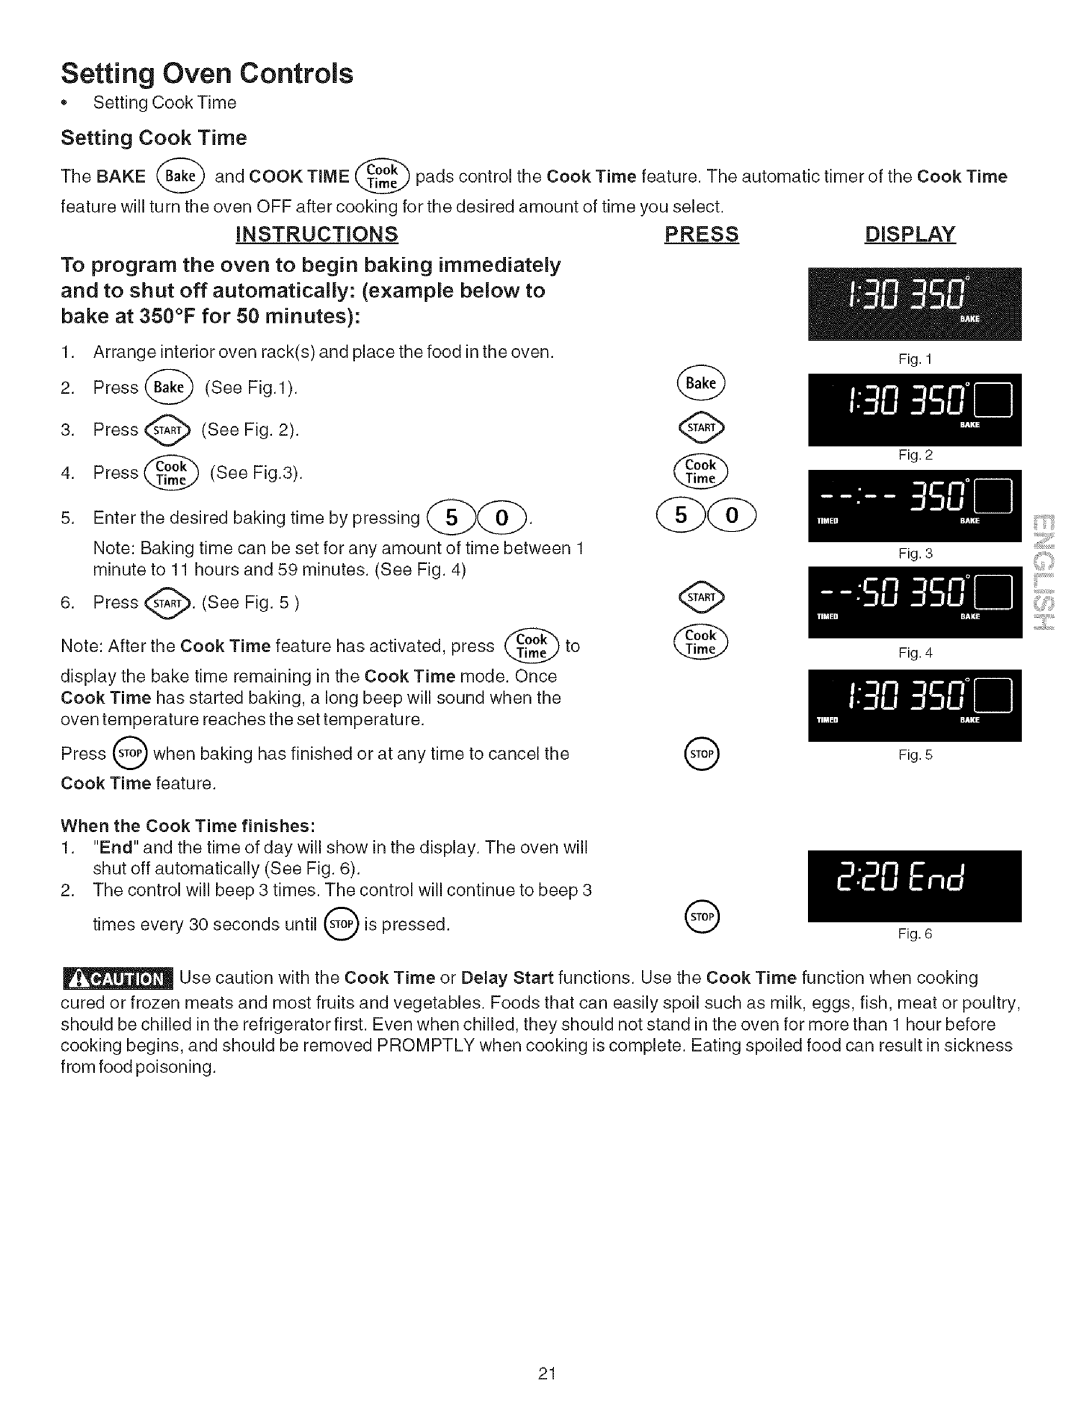 Kenmore 790.7946 manual Setting Oven Controls, Setting Cook Time, Instructions, Pressdisplay 